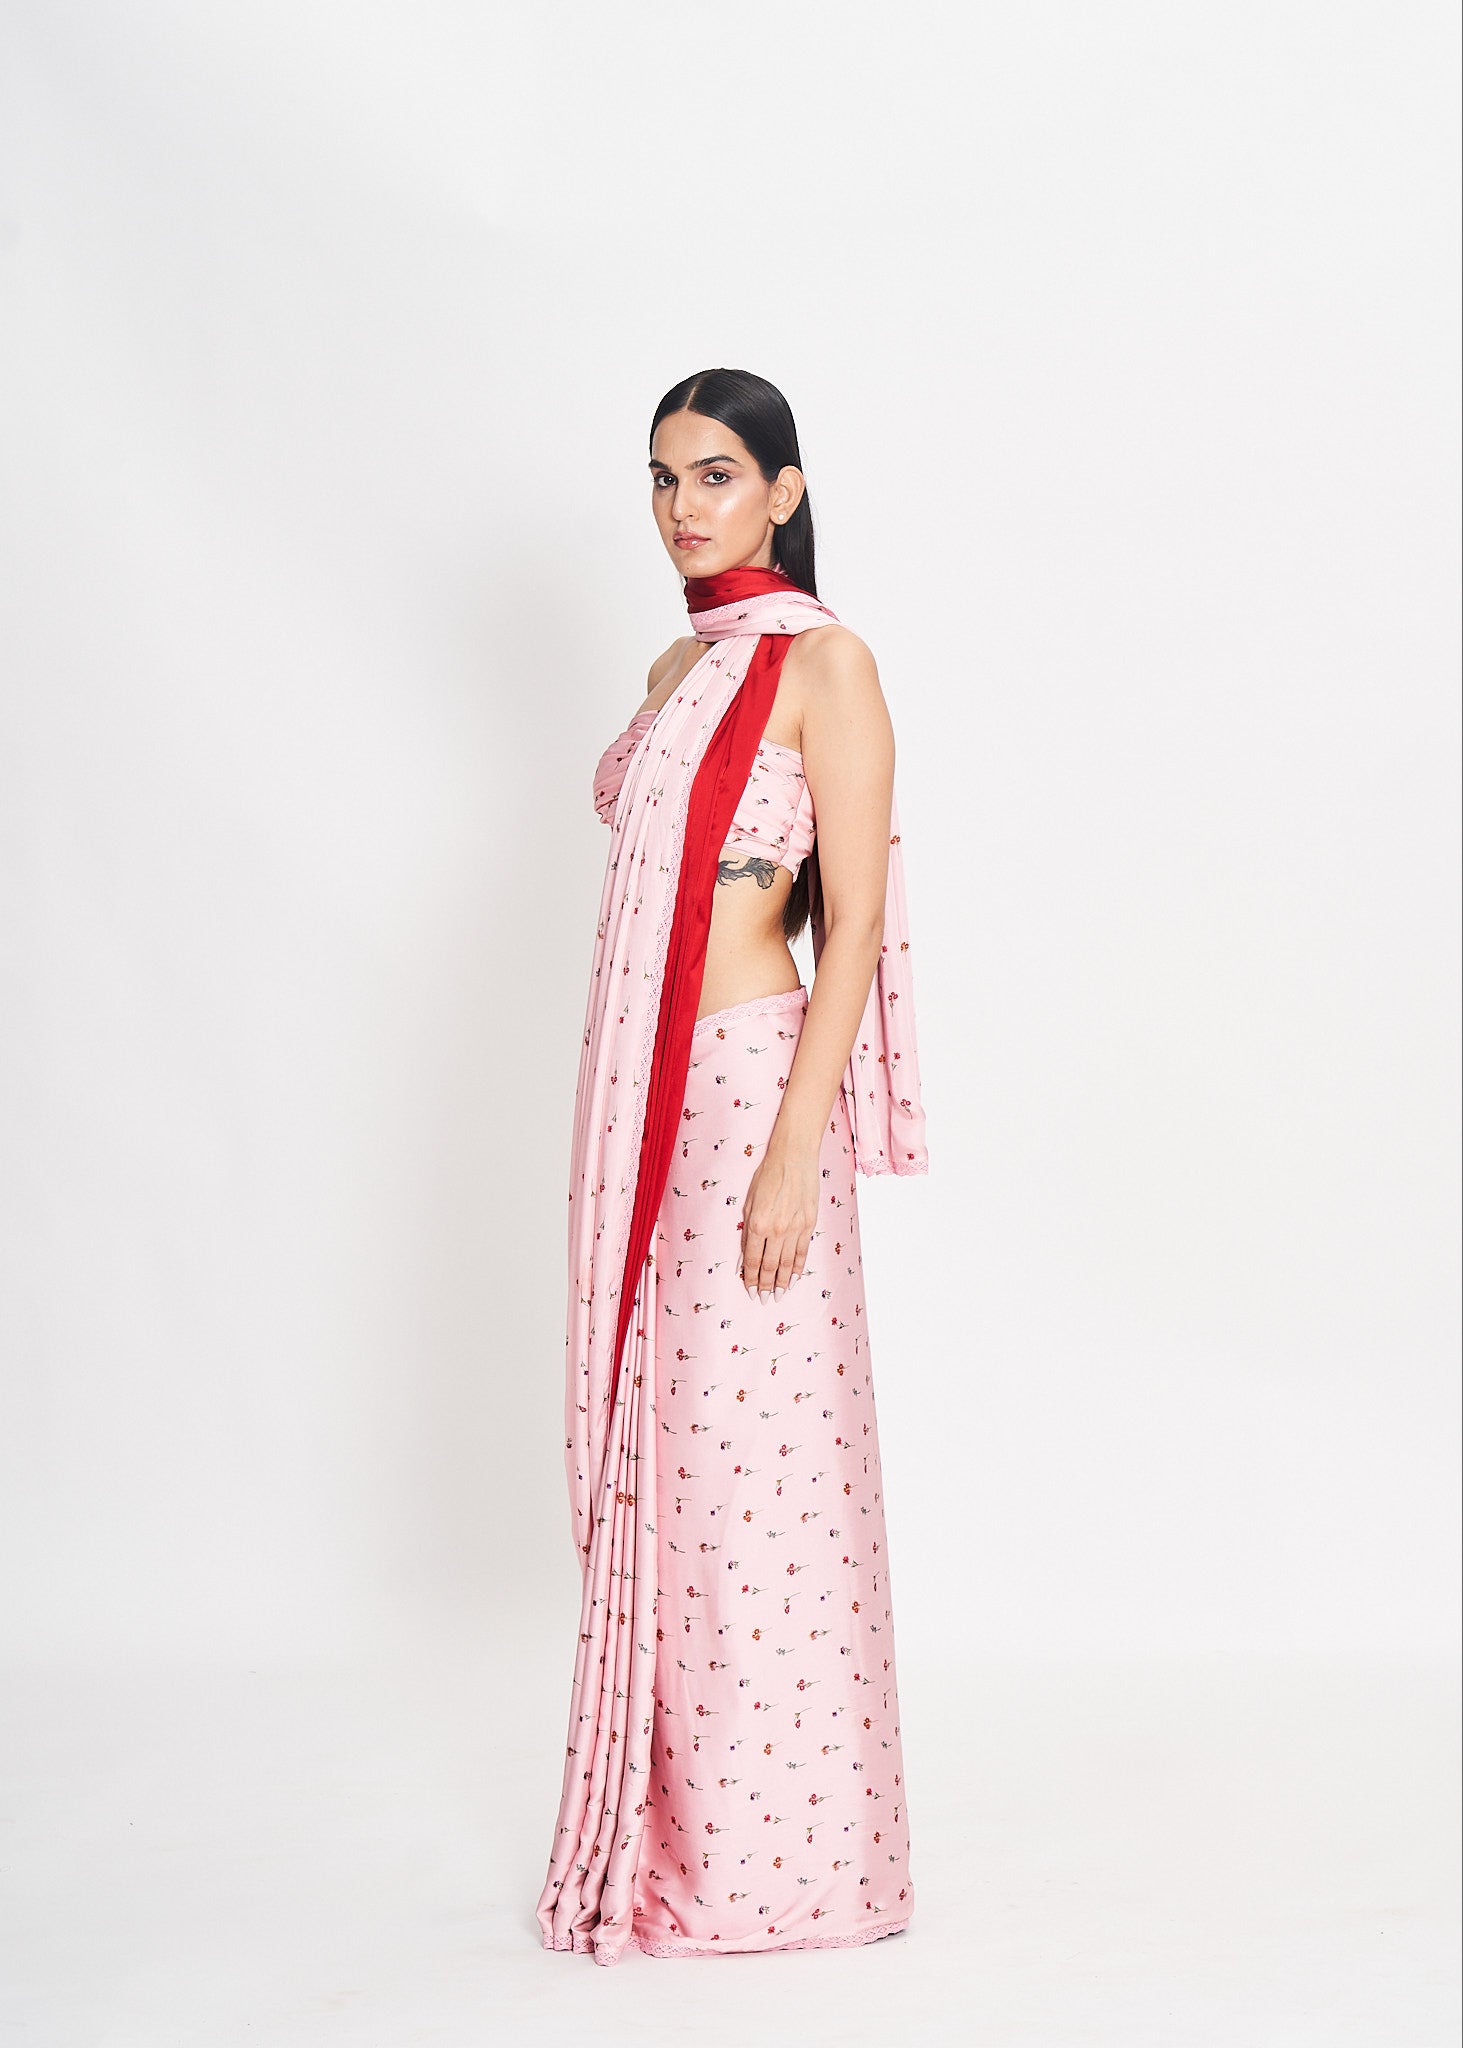 Wildflowers on Blush Saree and Blouse